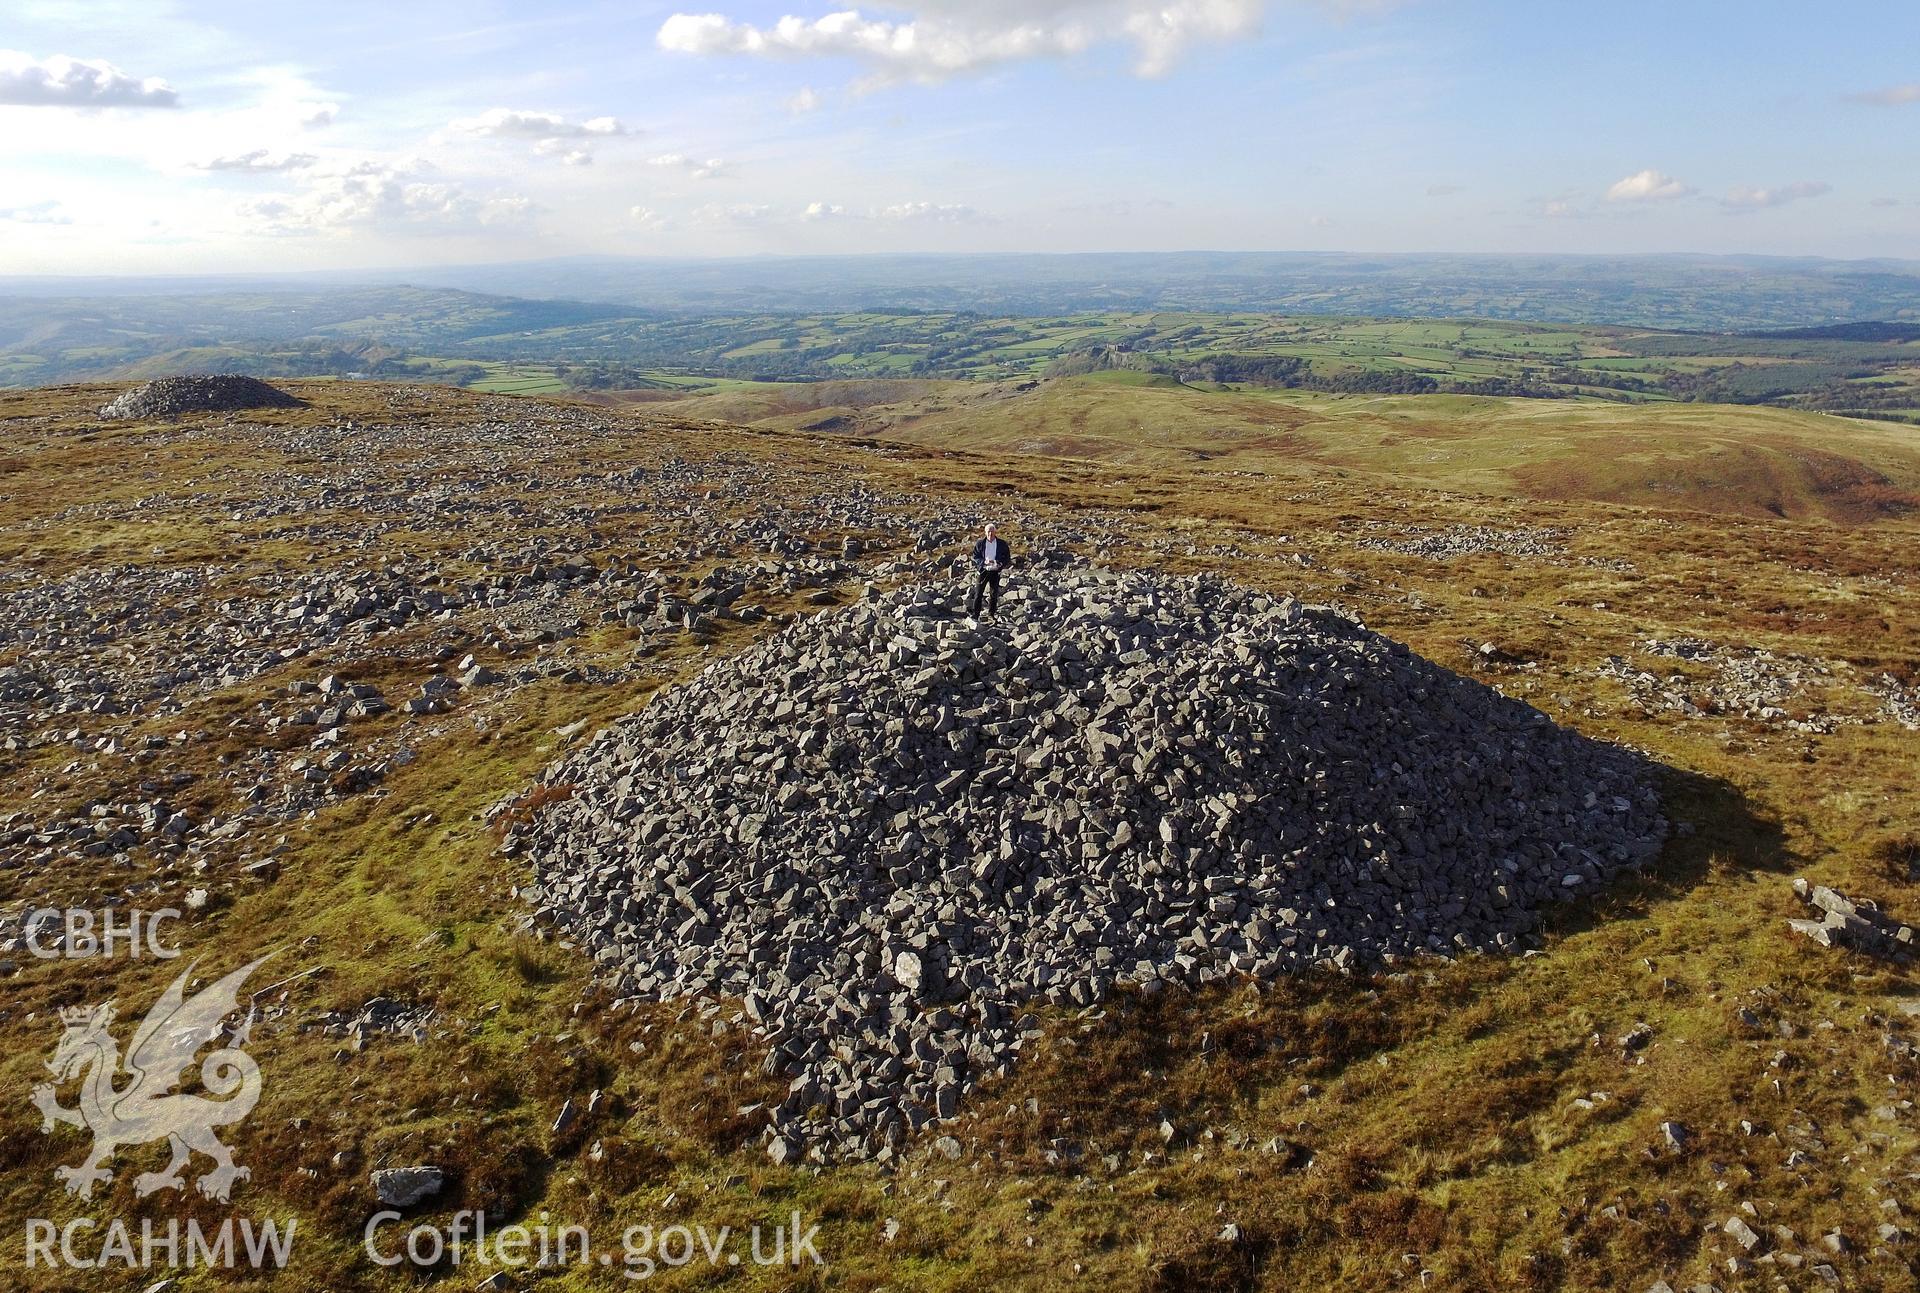 Colour photo showing Tair Carn Uchaf, taken by Paul R. Davis, 16th October 2016.